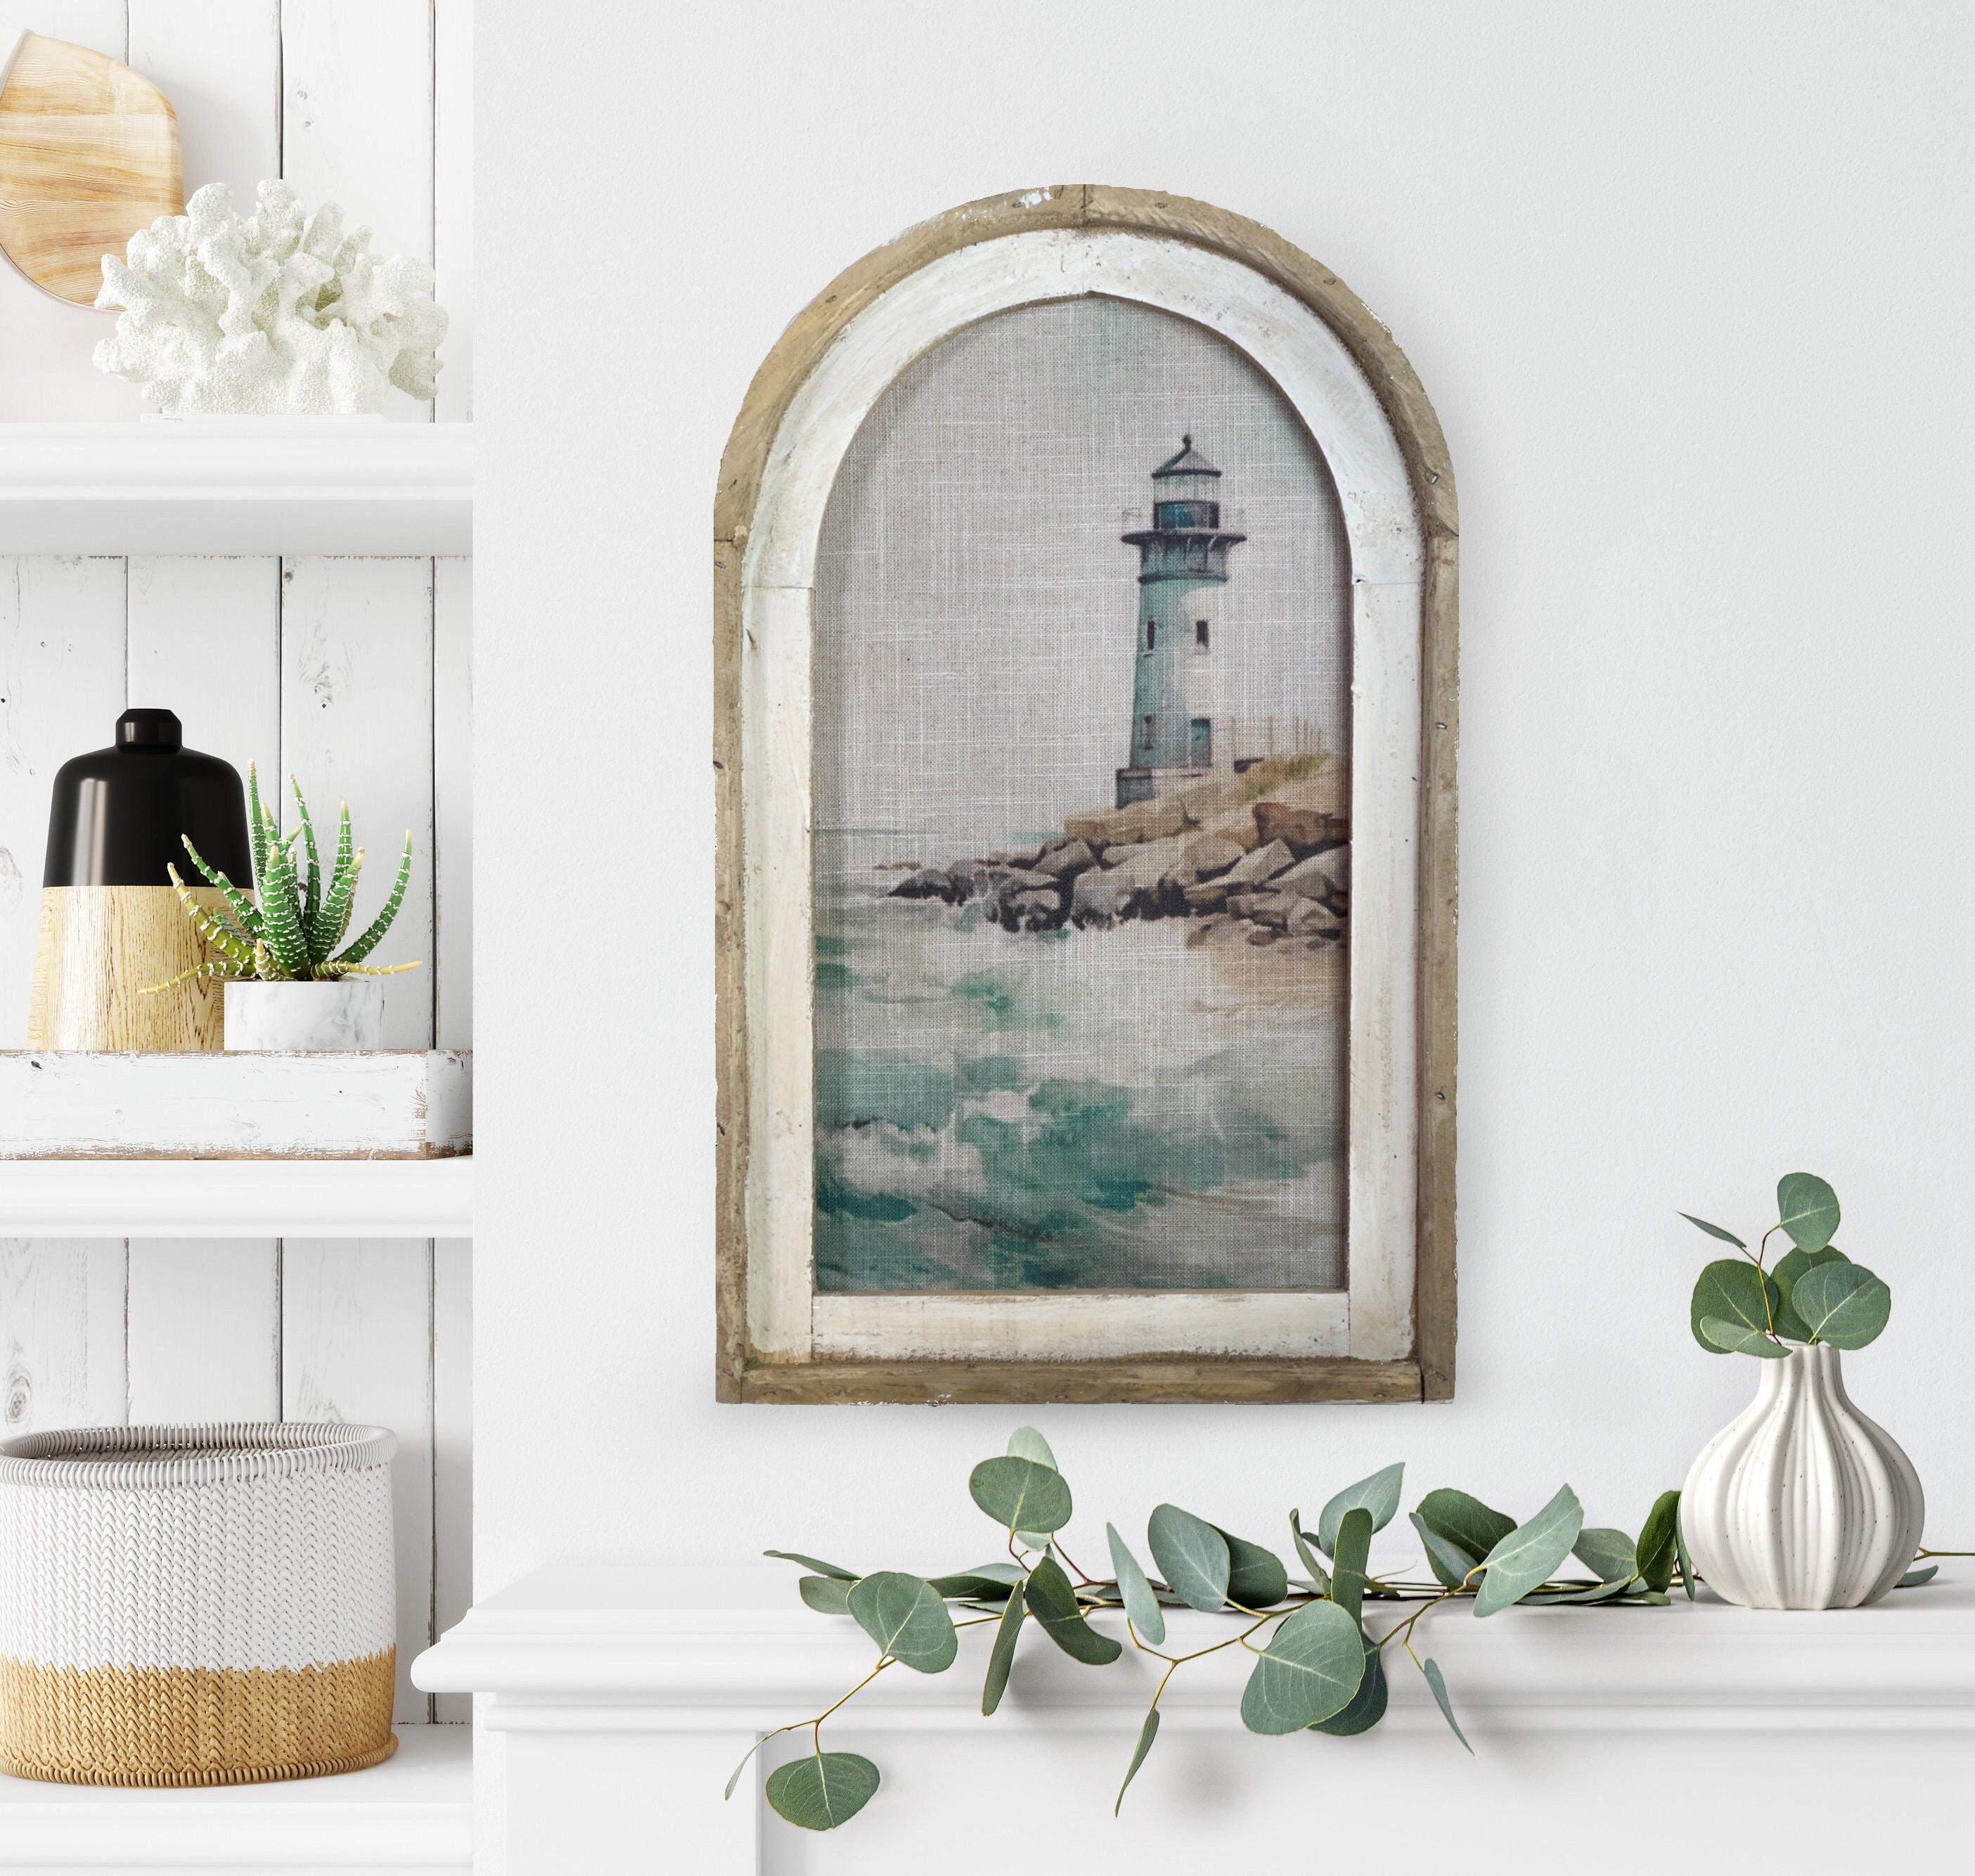 DIY Large Travel Gallery Wall Tutorial & Links - The DIY Lighthouse